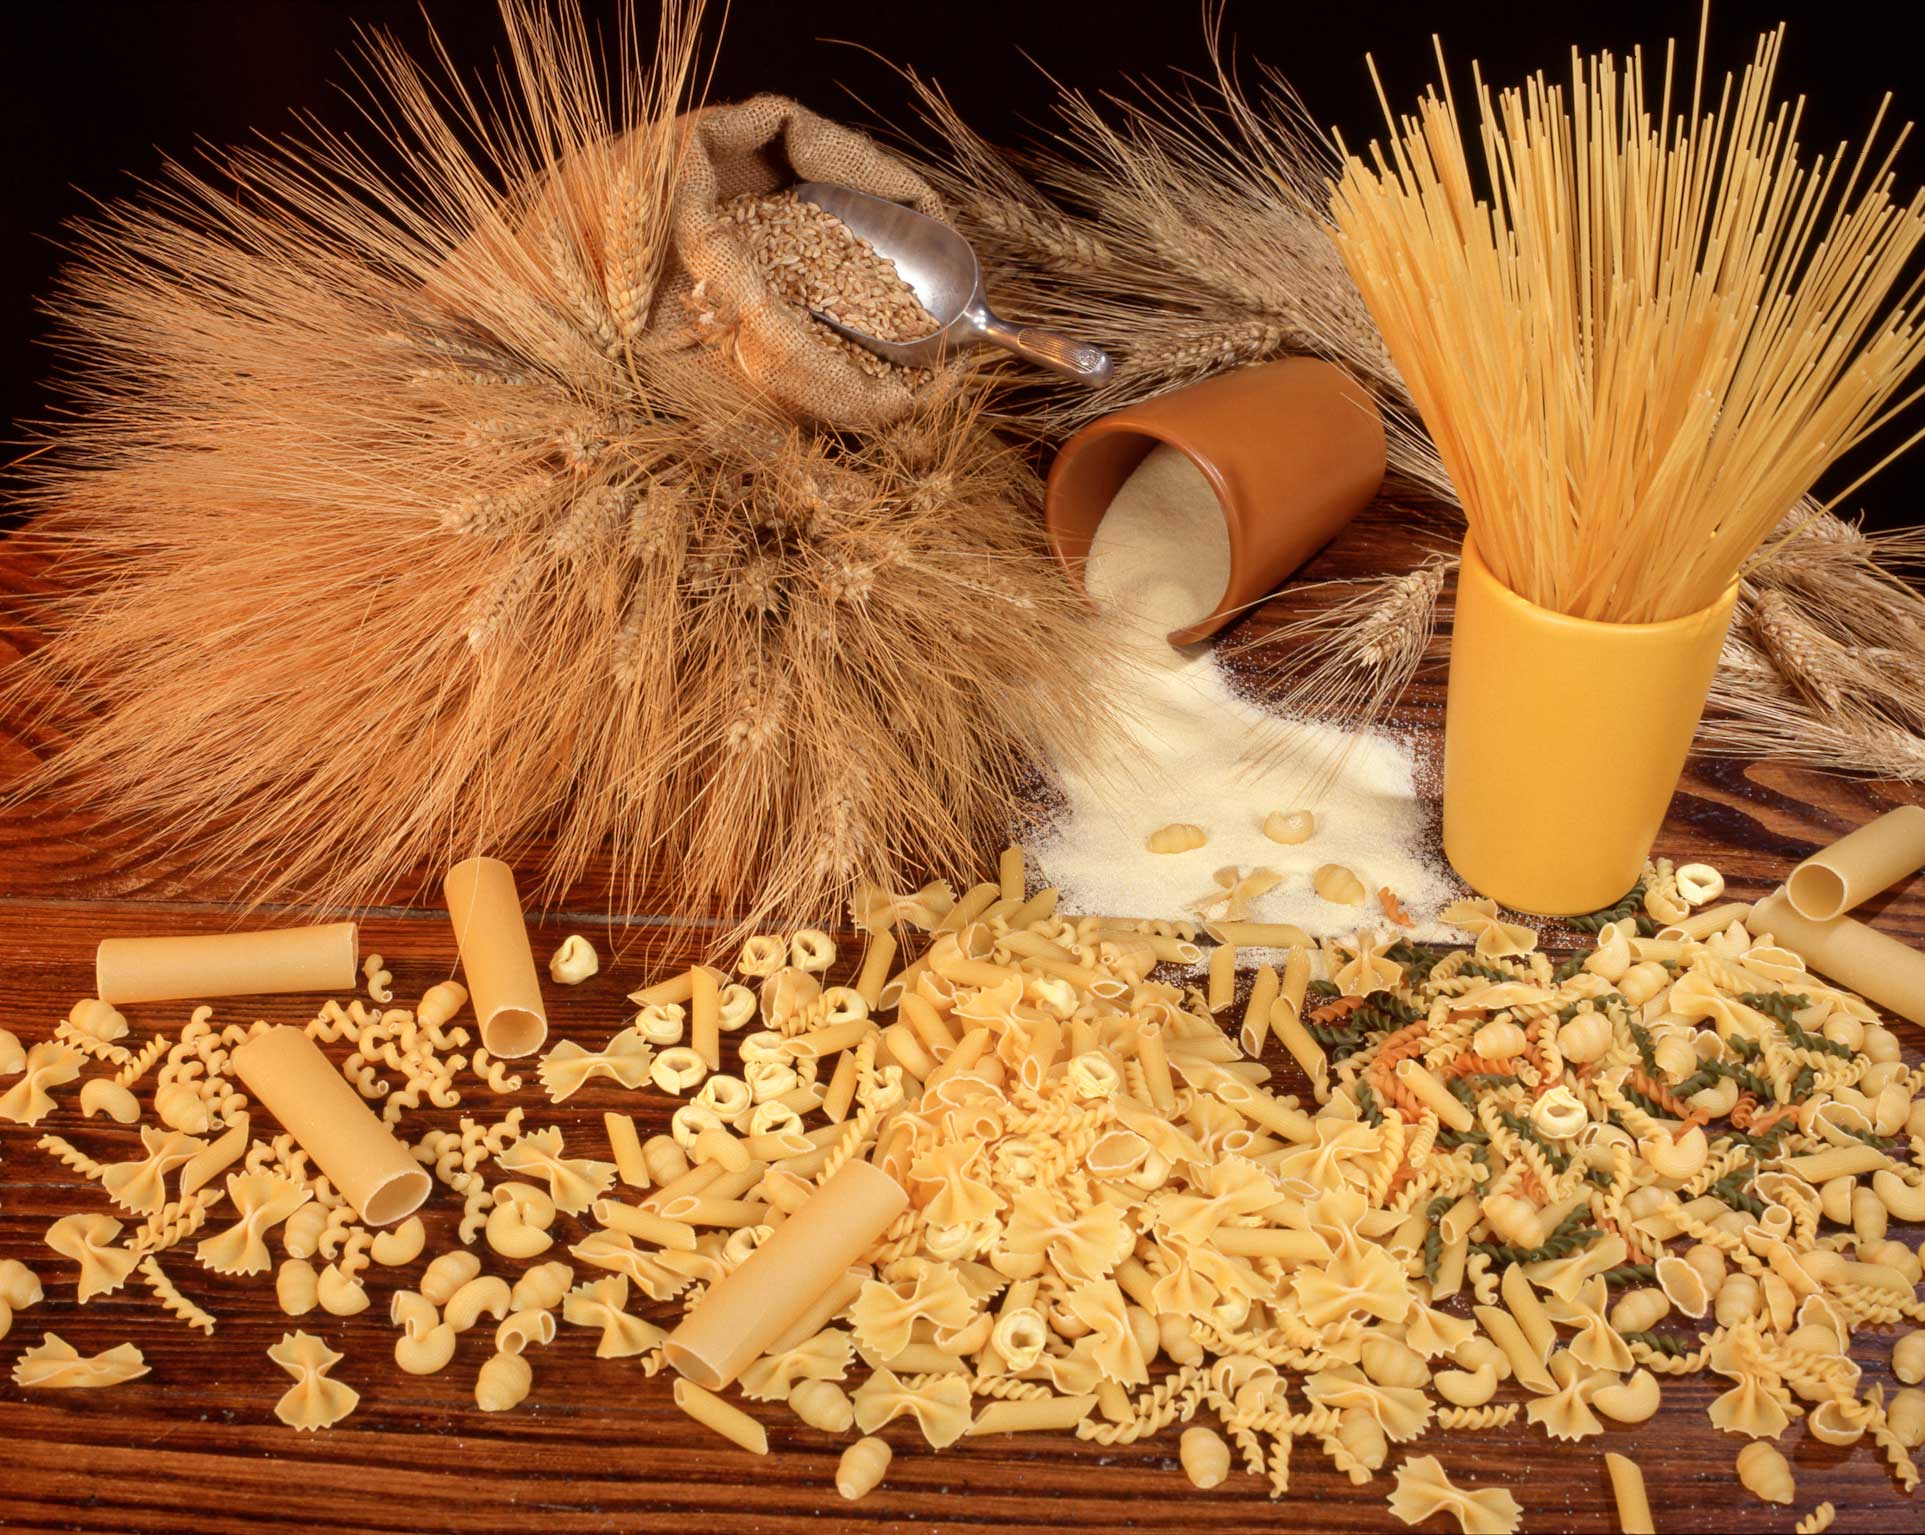 Photograph of durum wheat and products made from durum wheat. The photo shows a variety of pasta strewn in the foreground. In the background are, from left to right, a bundle of wheat ears, wheat grains in a scoop sitting on a burlap sack, a brown container on its side with flour spilling out, and a yellow container standing upright with dry spaghetti noodles in it.